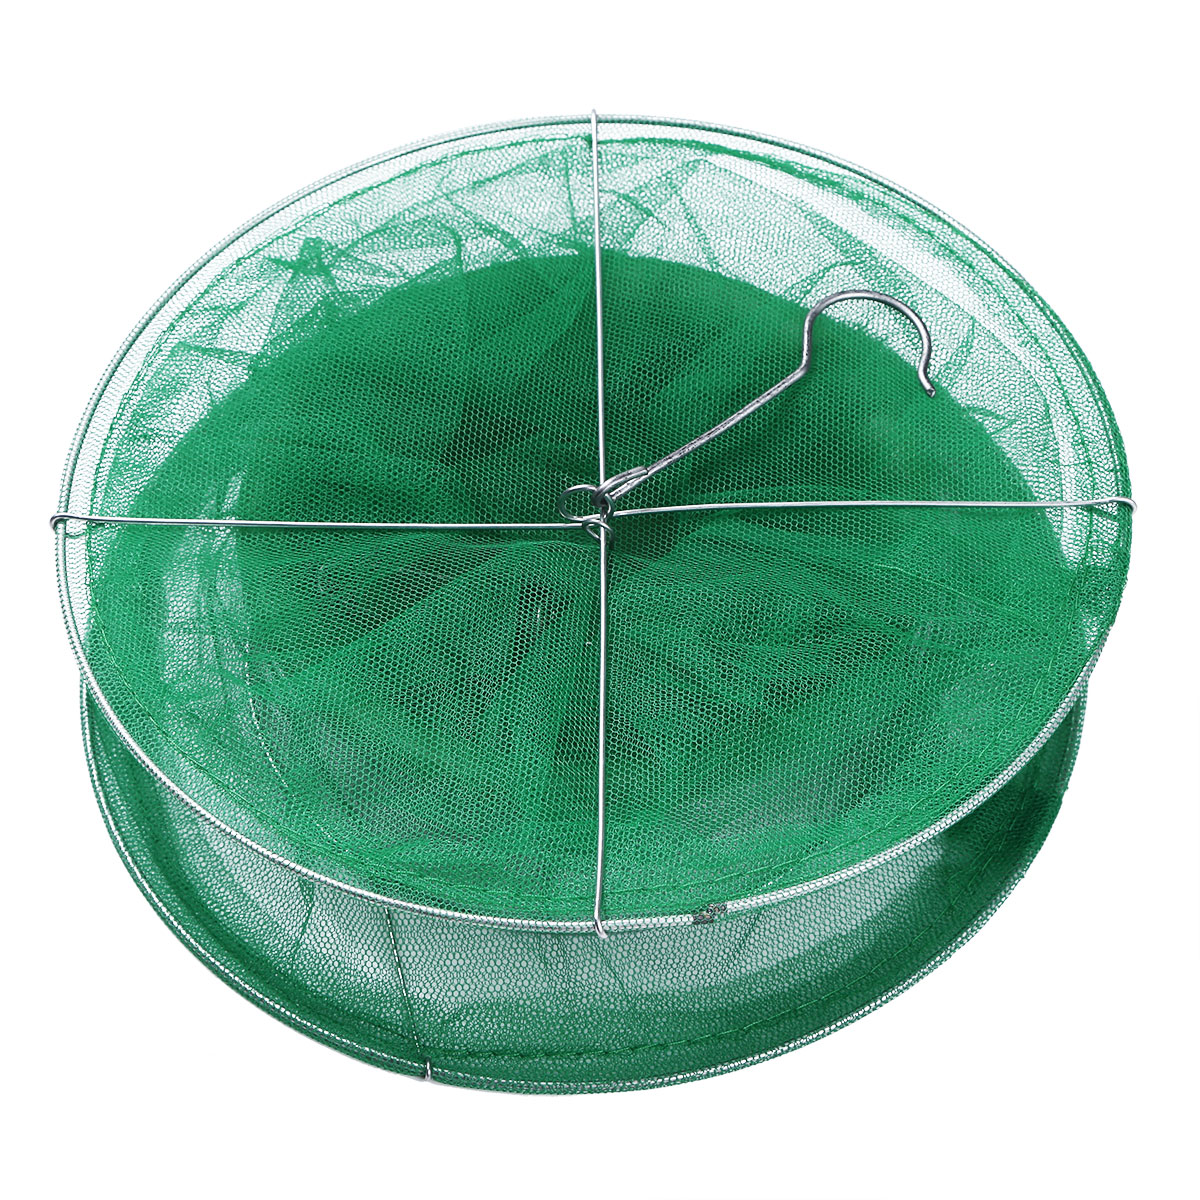 Outdoor Gardening Hanging Folding Reusable Fly Insect Trap Net Catcher Killer Cage with Bait Storage Pot Catcher Killer Flytrap